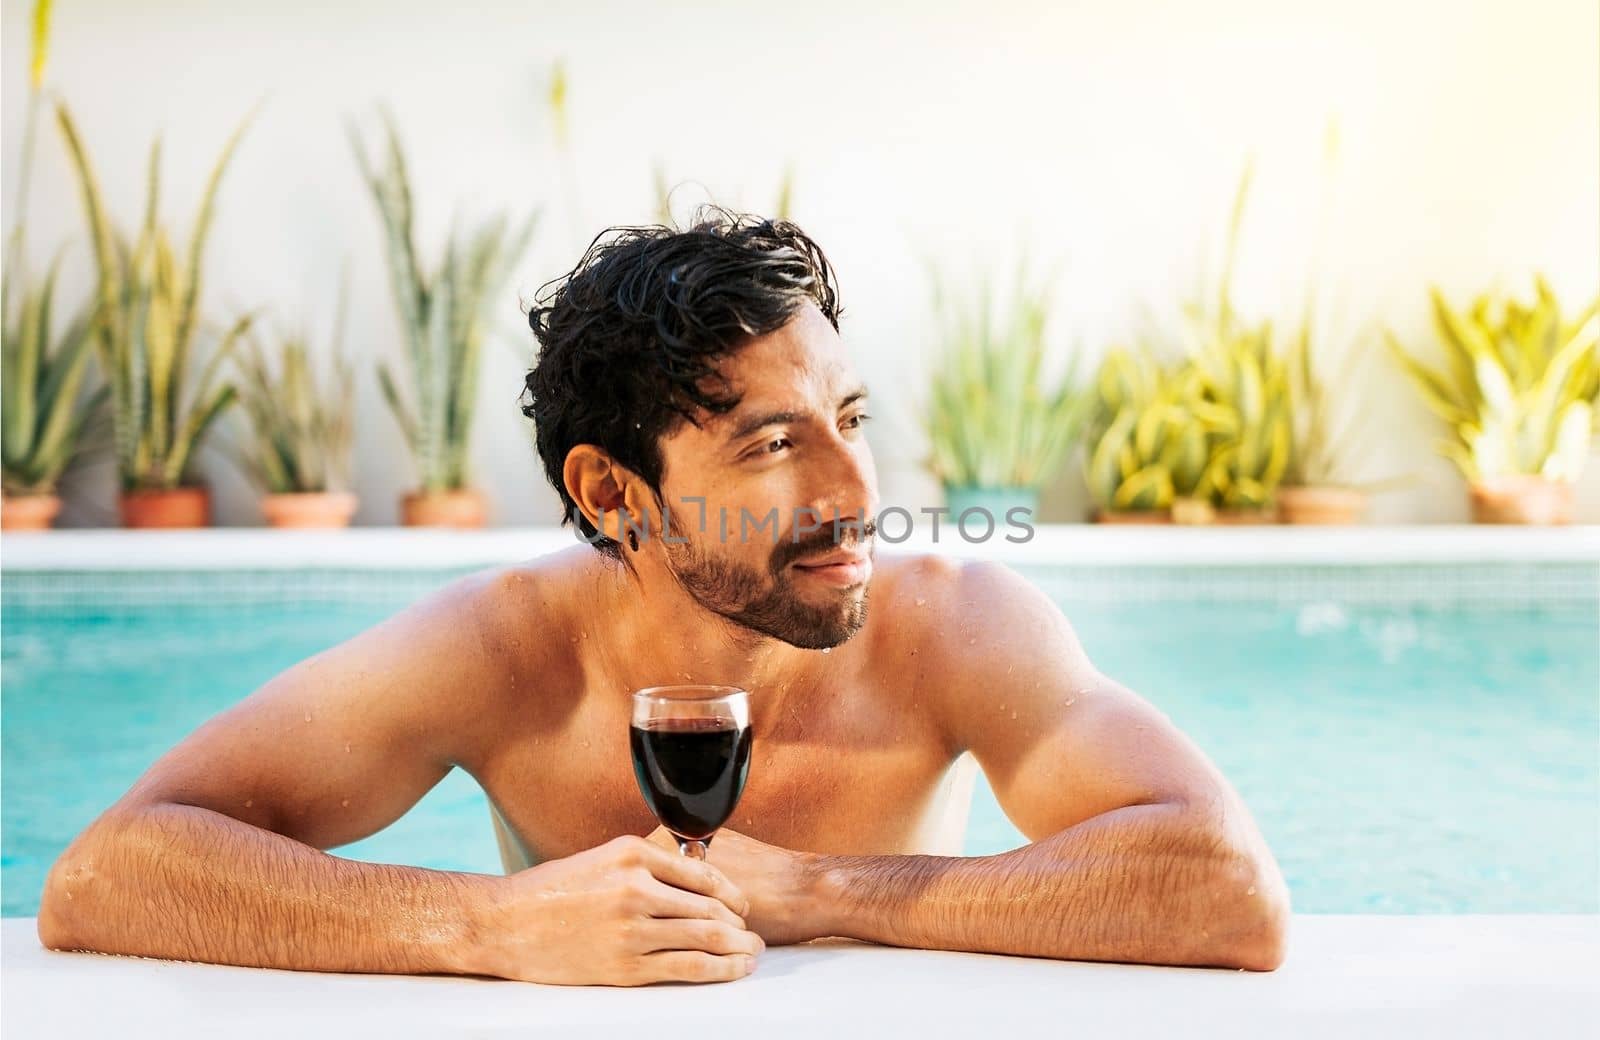 Portrait of man at the edge of swimming pool with a glass of wine. Handsome man in swimming pool holding glass of wine. Handsome guy on the edge of the pool holding a glass of wine